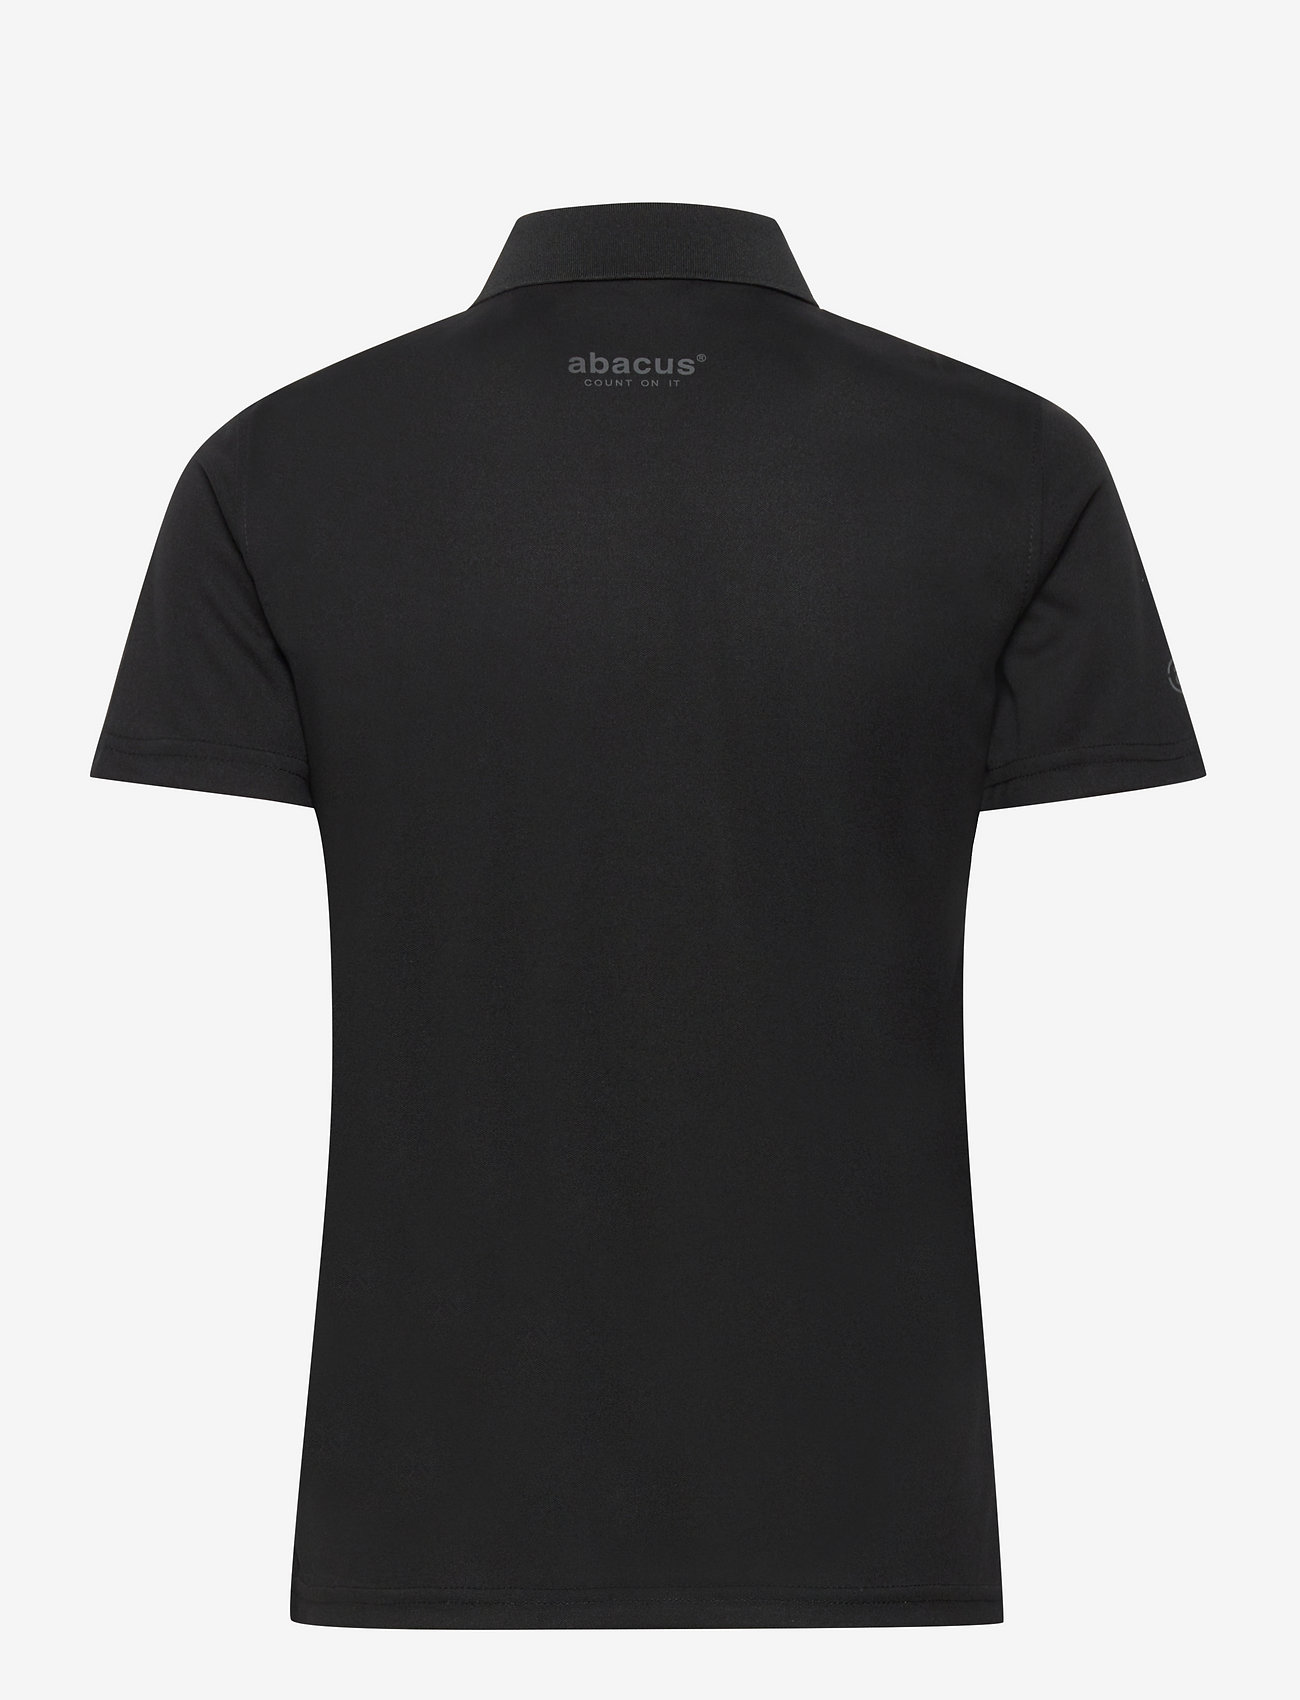 Abacus - Lds Cray drycool polo - tops & t-shirts - black - 1